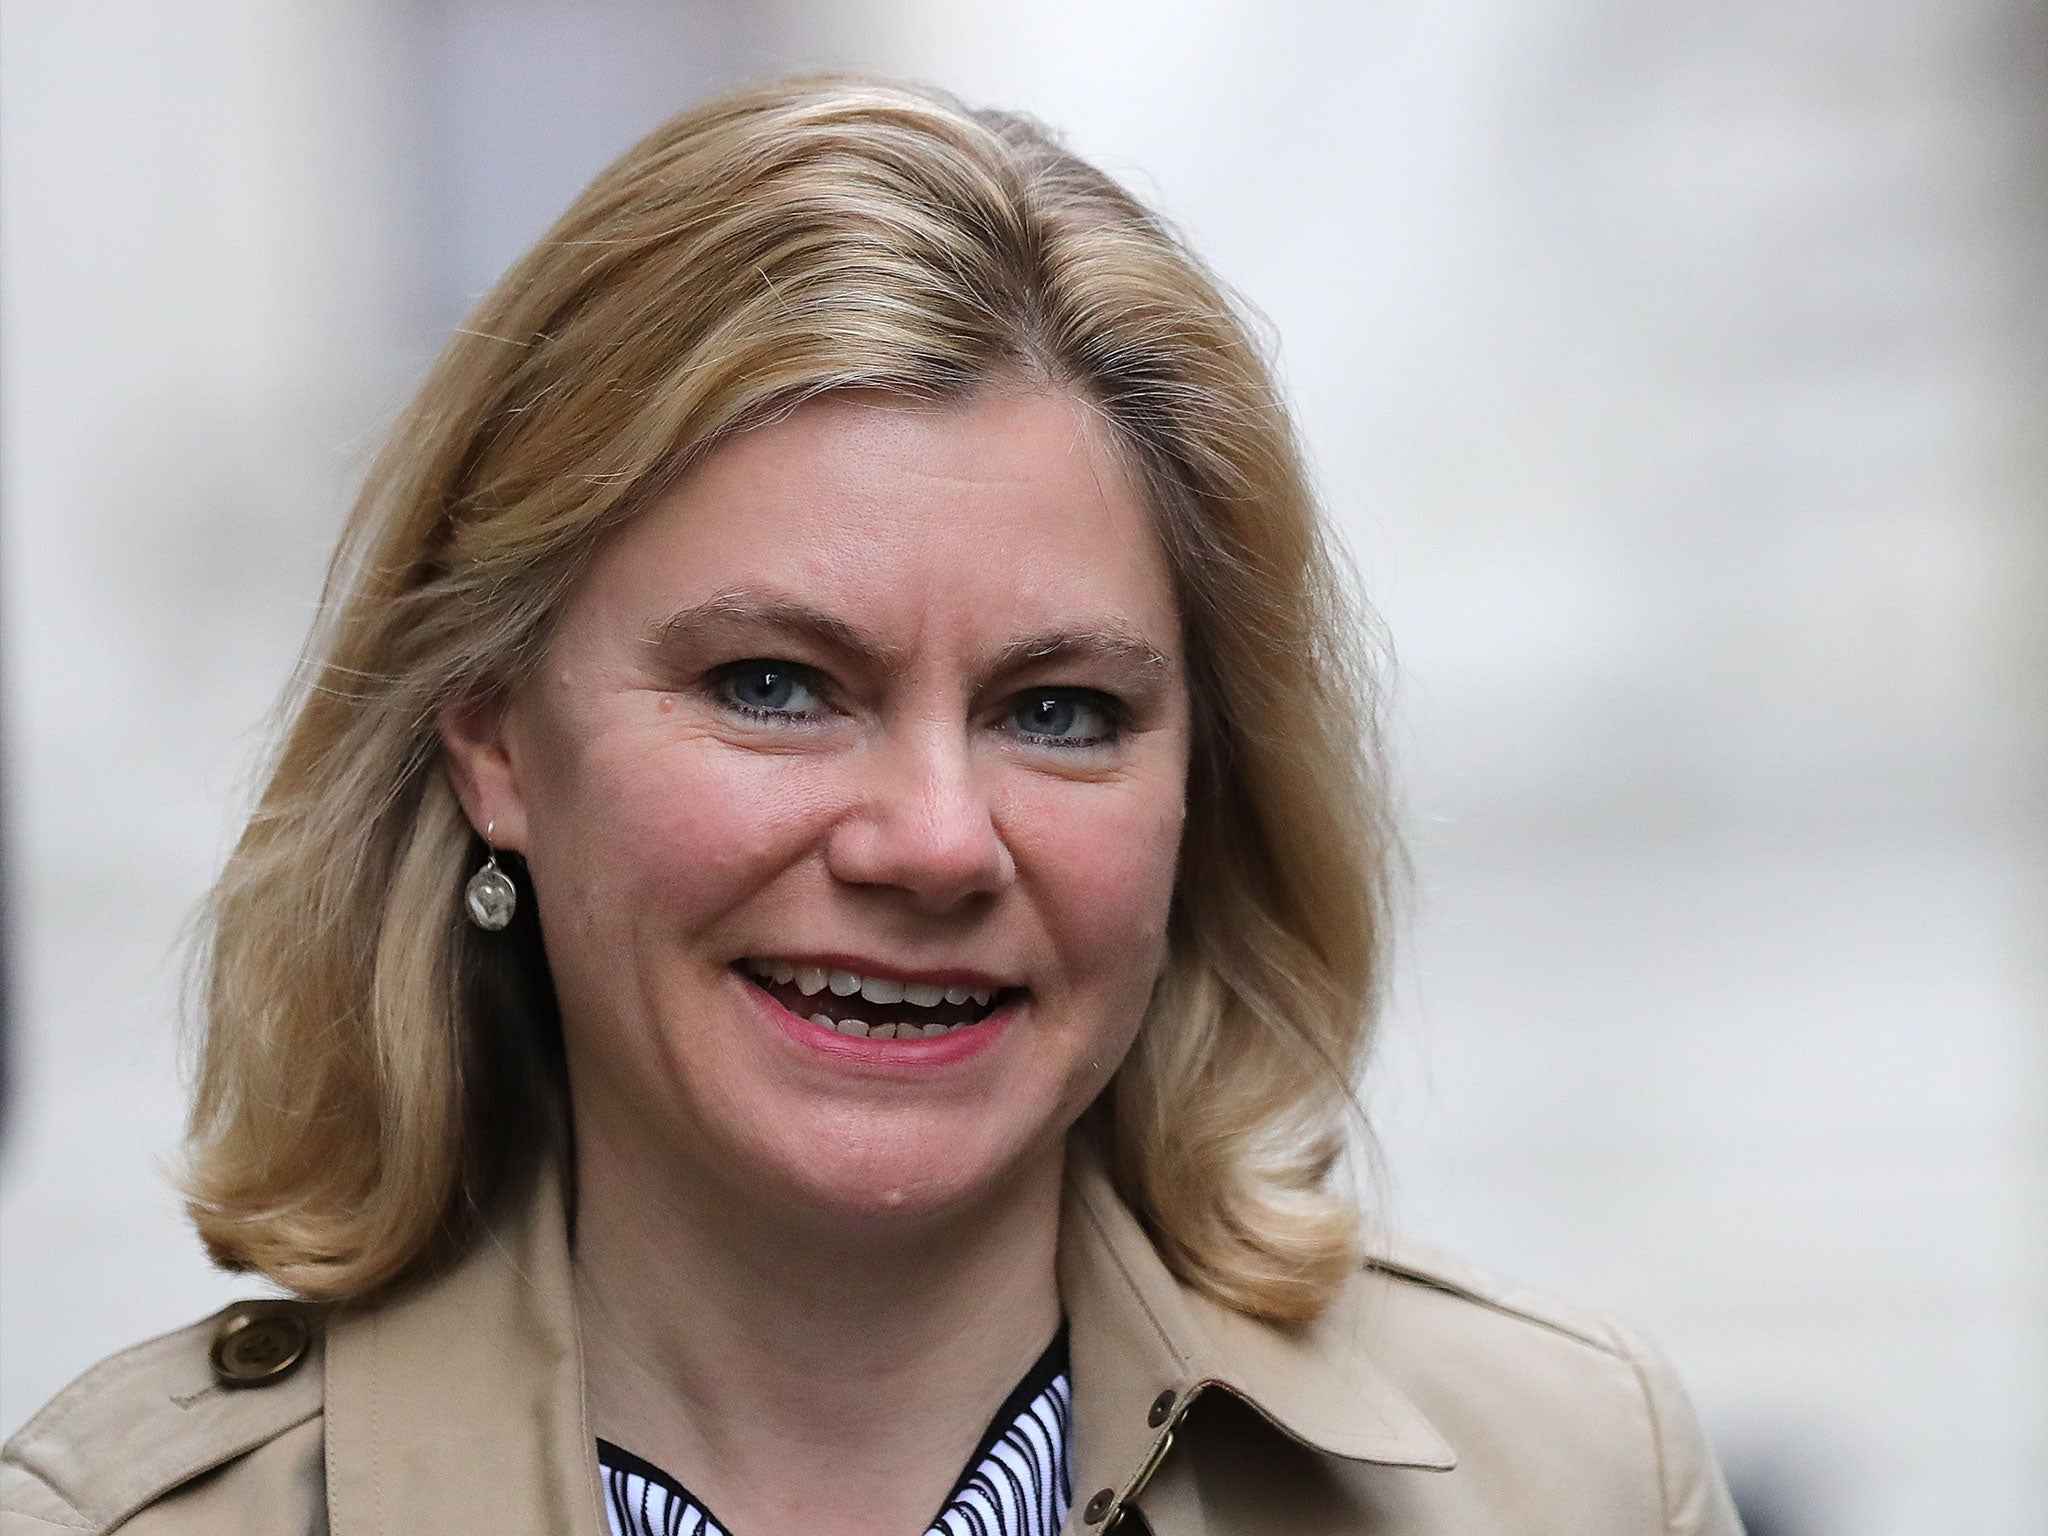 Secretary of State for Education Justine Greening arrives for a cabinet meeting at 10 Downing Street on March 29, 2017